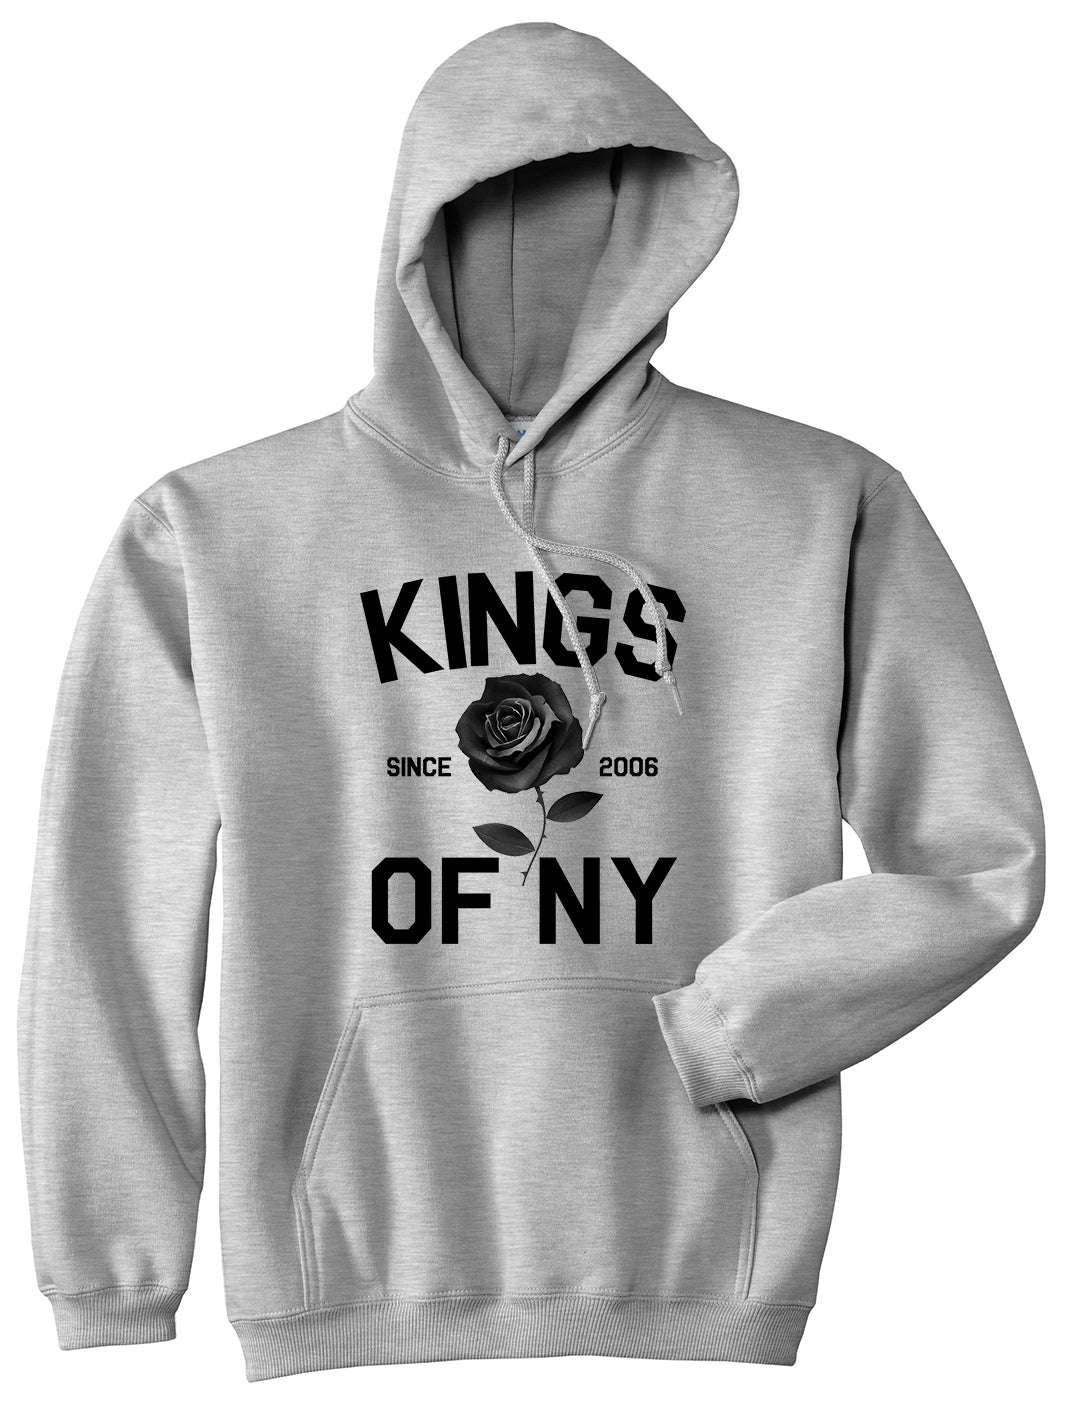 Black Rose Since 2006 Mens Pullover Hoodie Grey by Kings Of NY